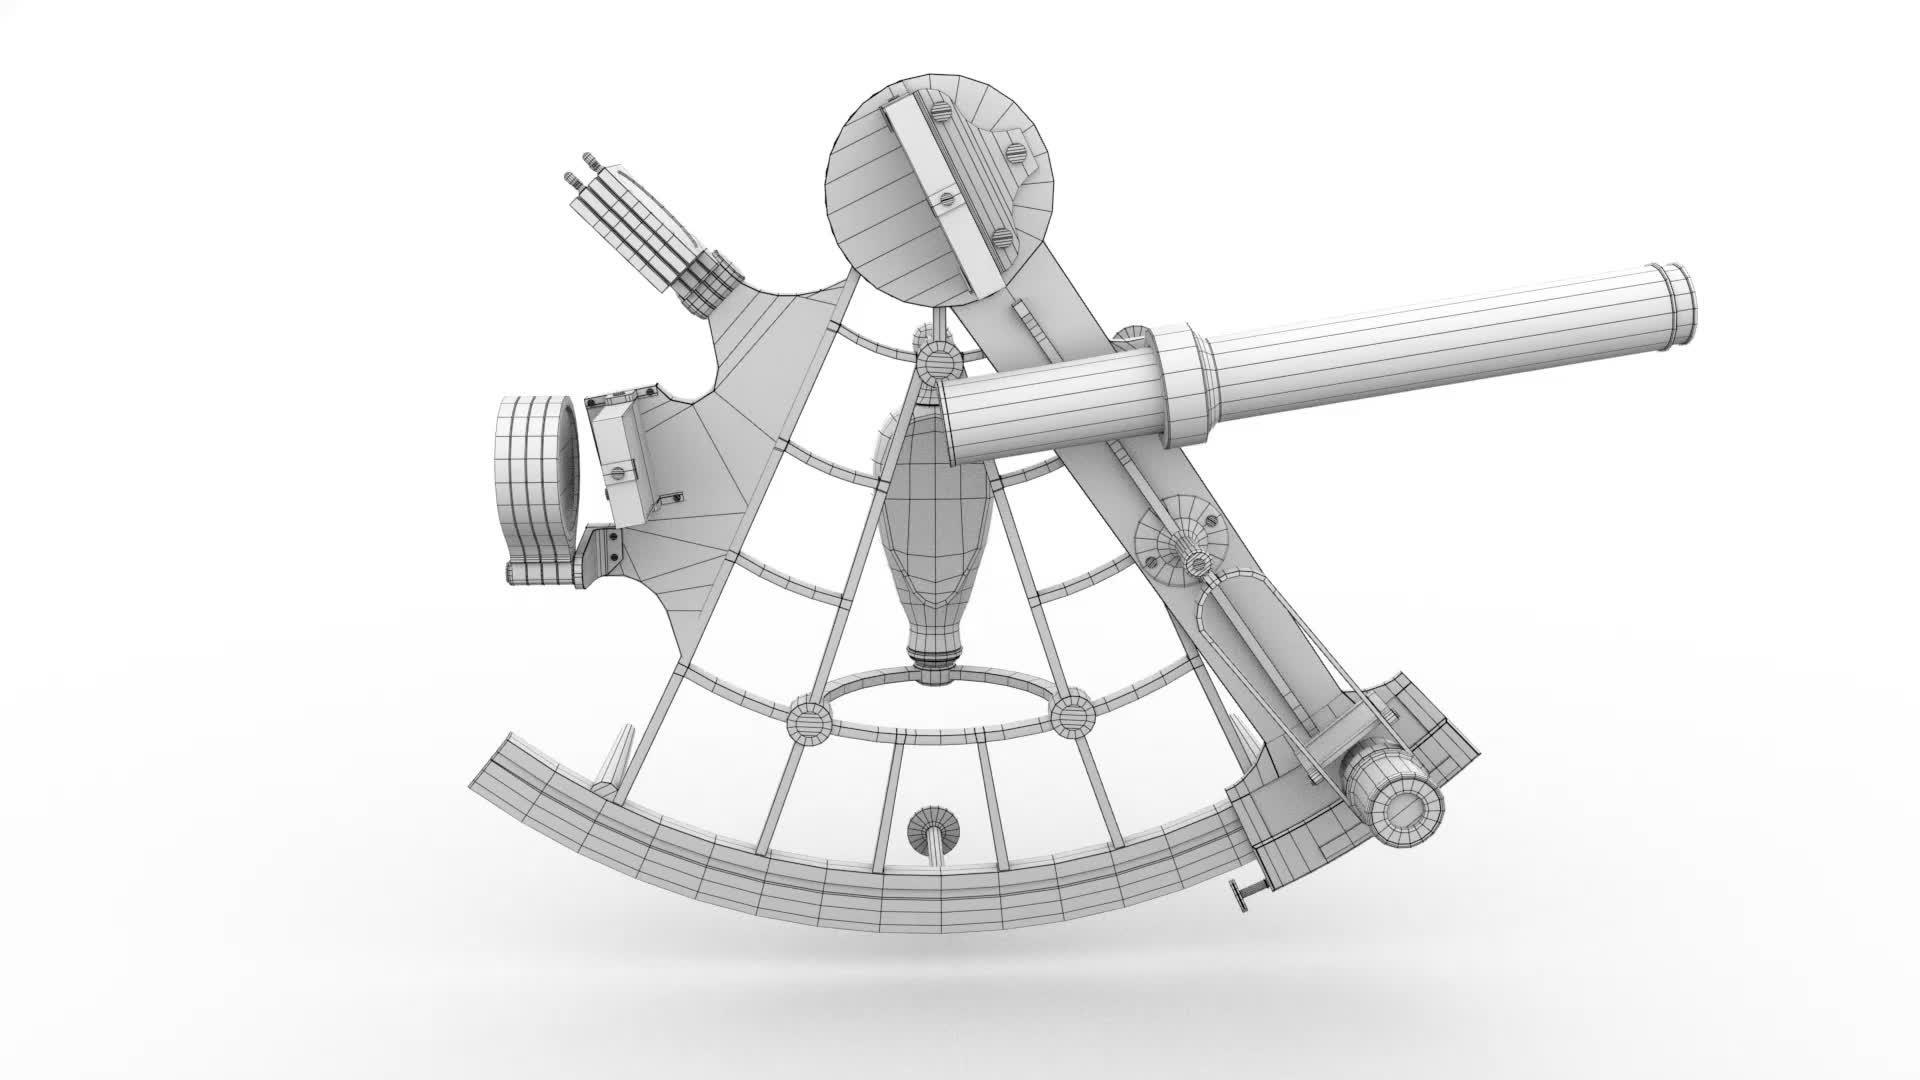 Sextant illustration Black and White Stock Photos & Images - Alamy